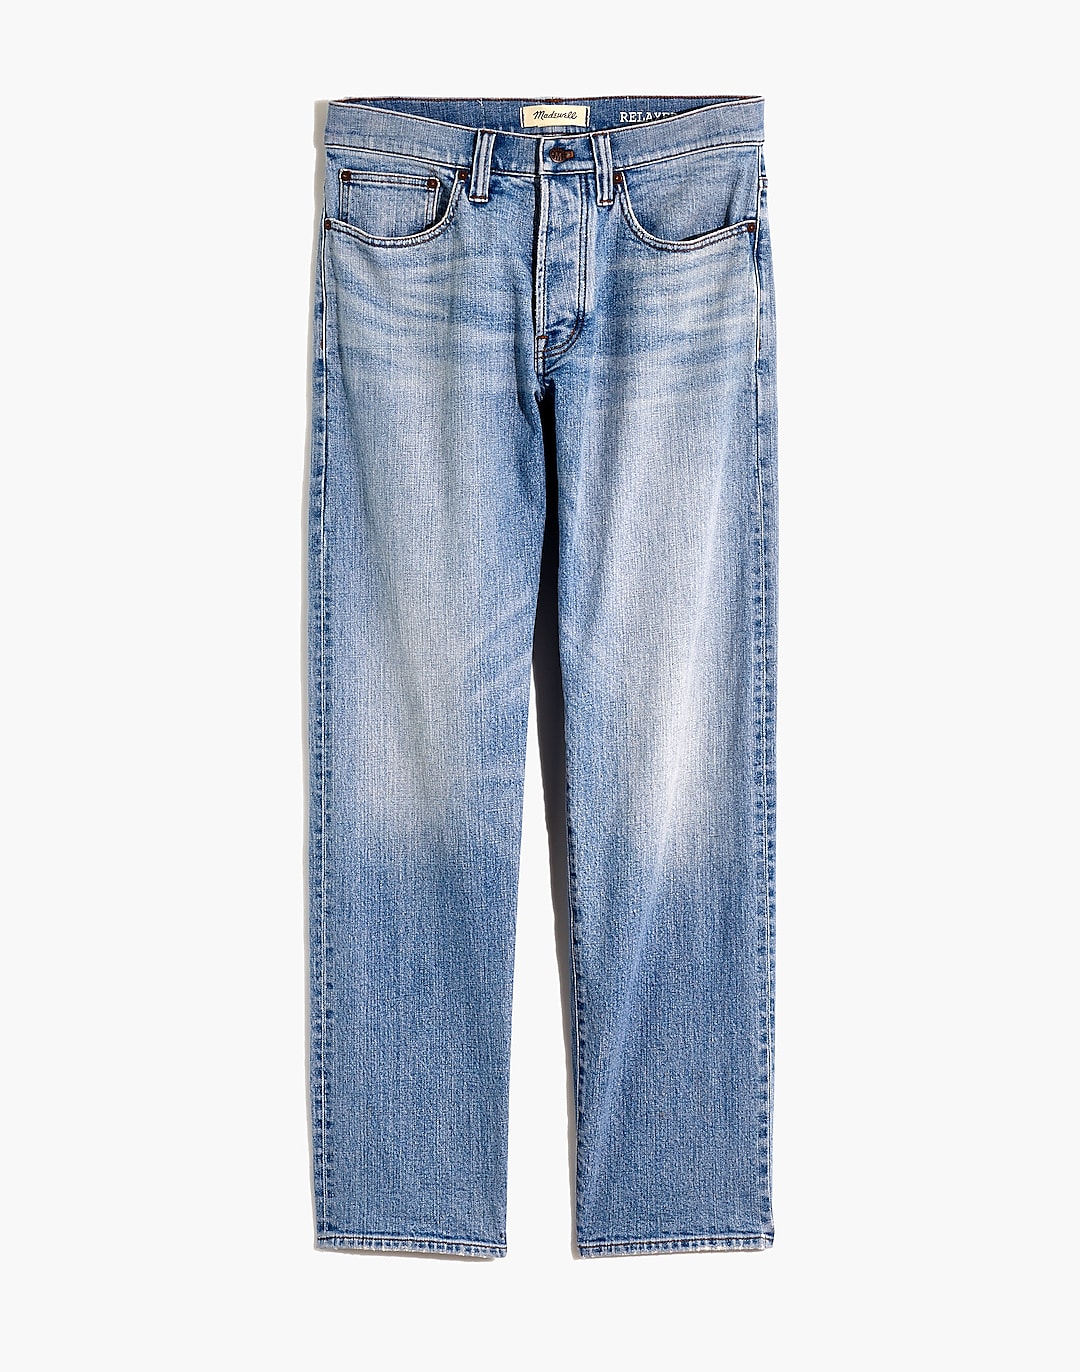 Relaxed Straight Authentic Flex in Wash Wyndham Selvedge Jeans